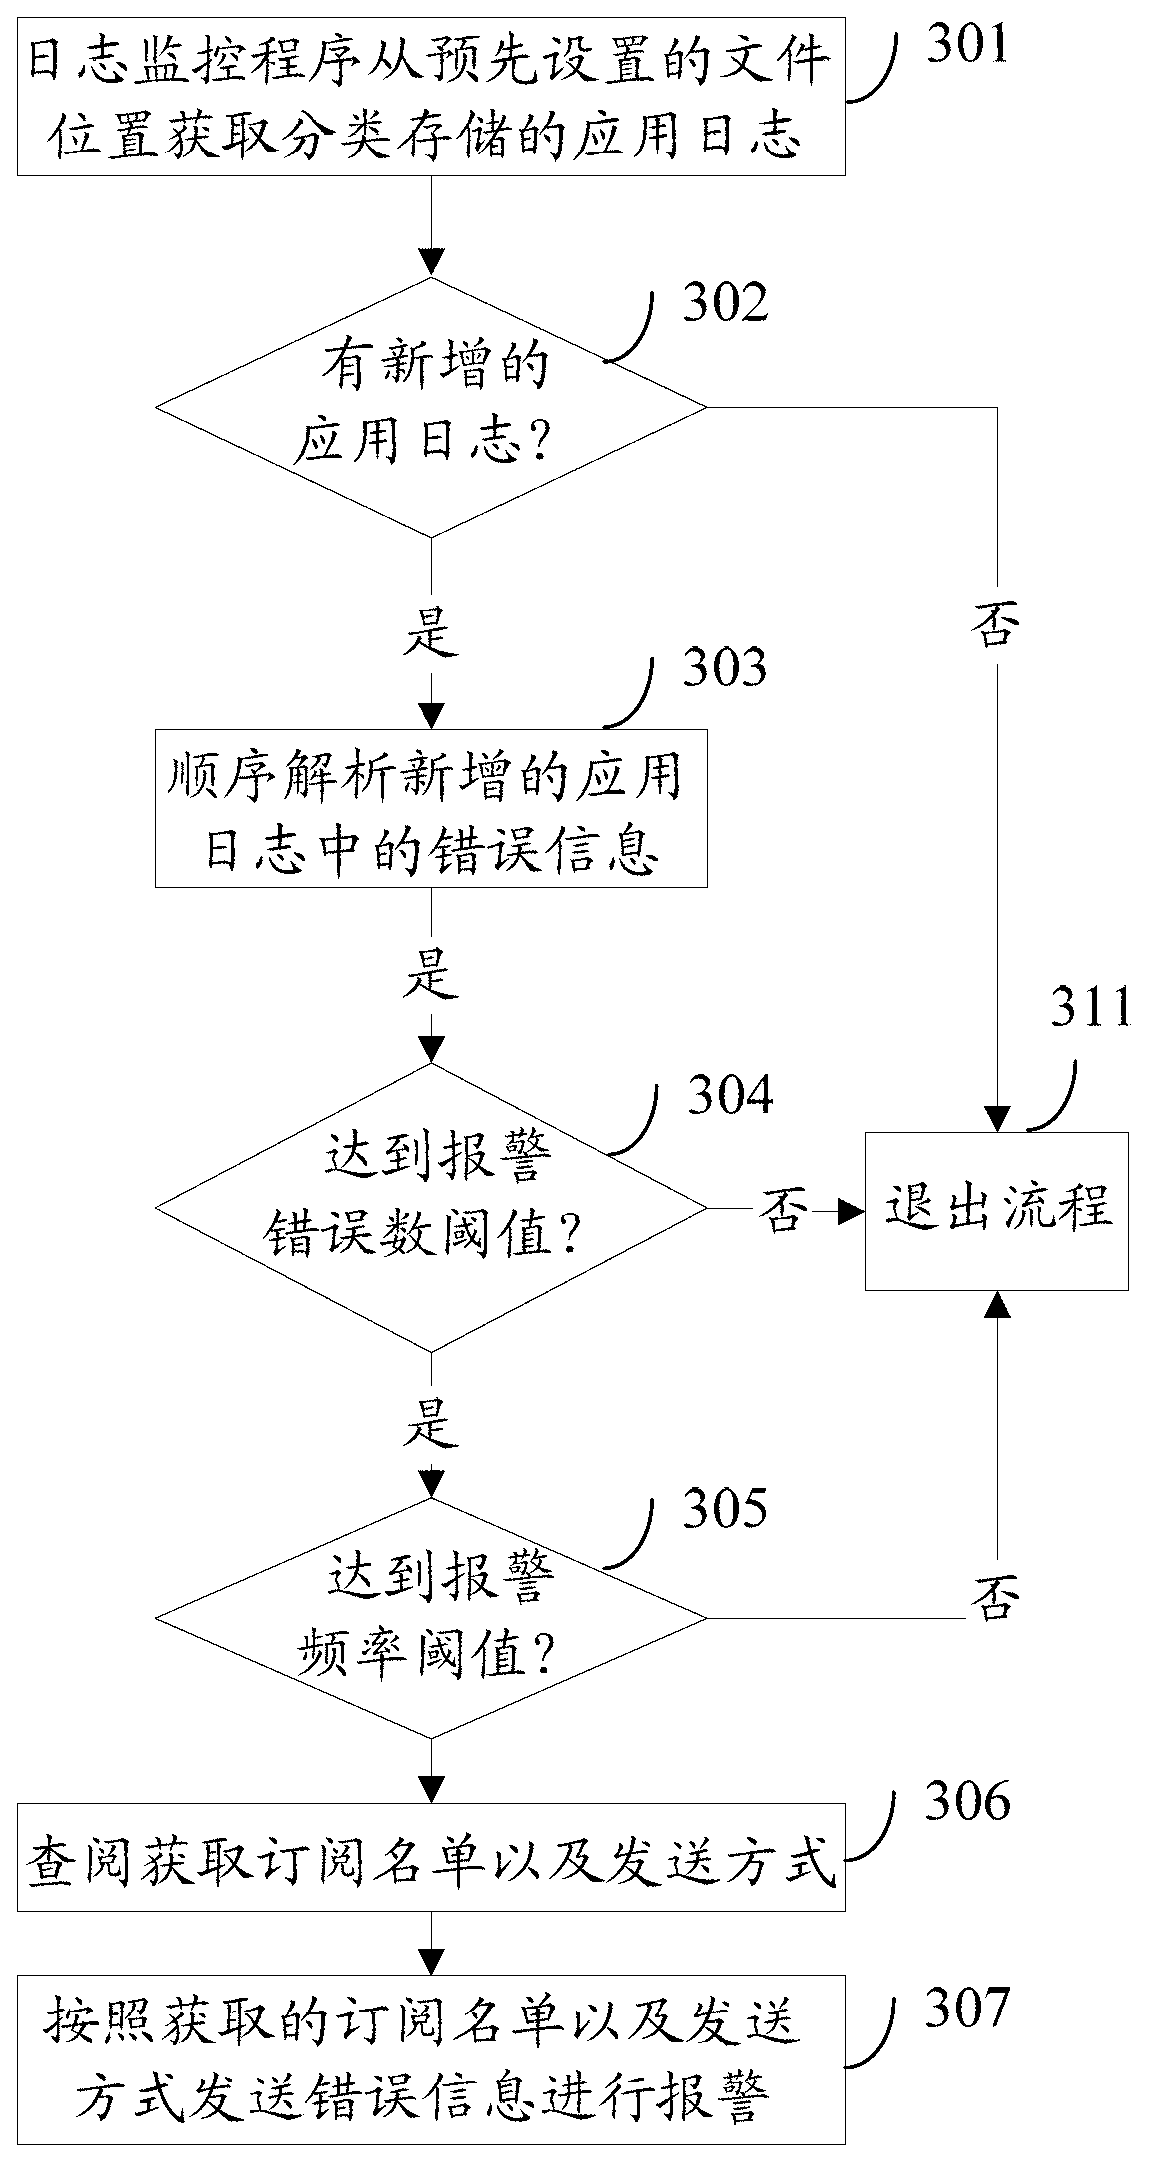 Method and system for monitoring application logs